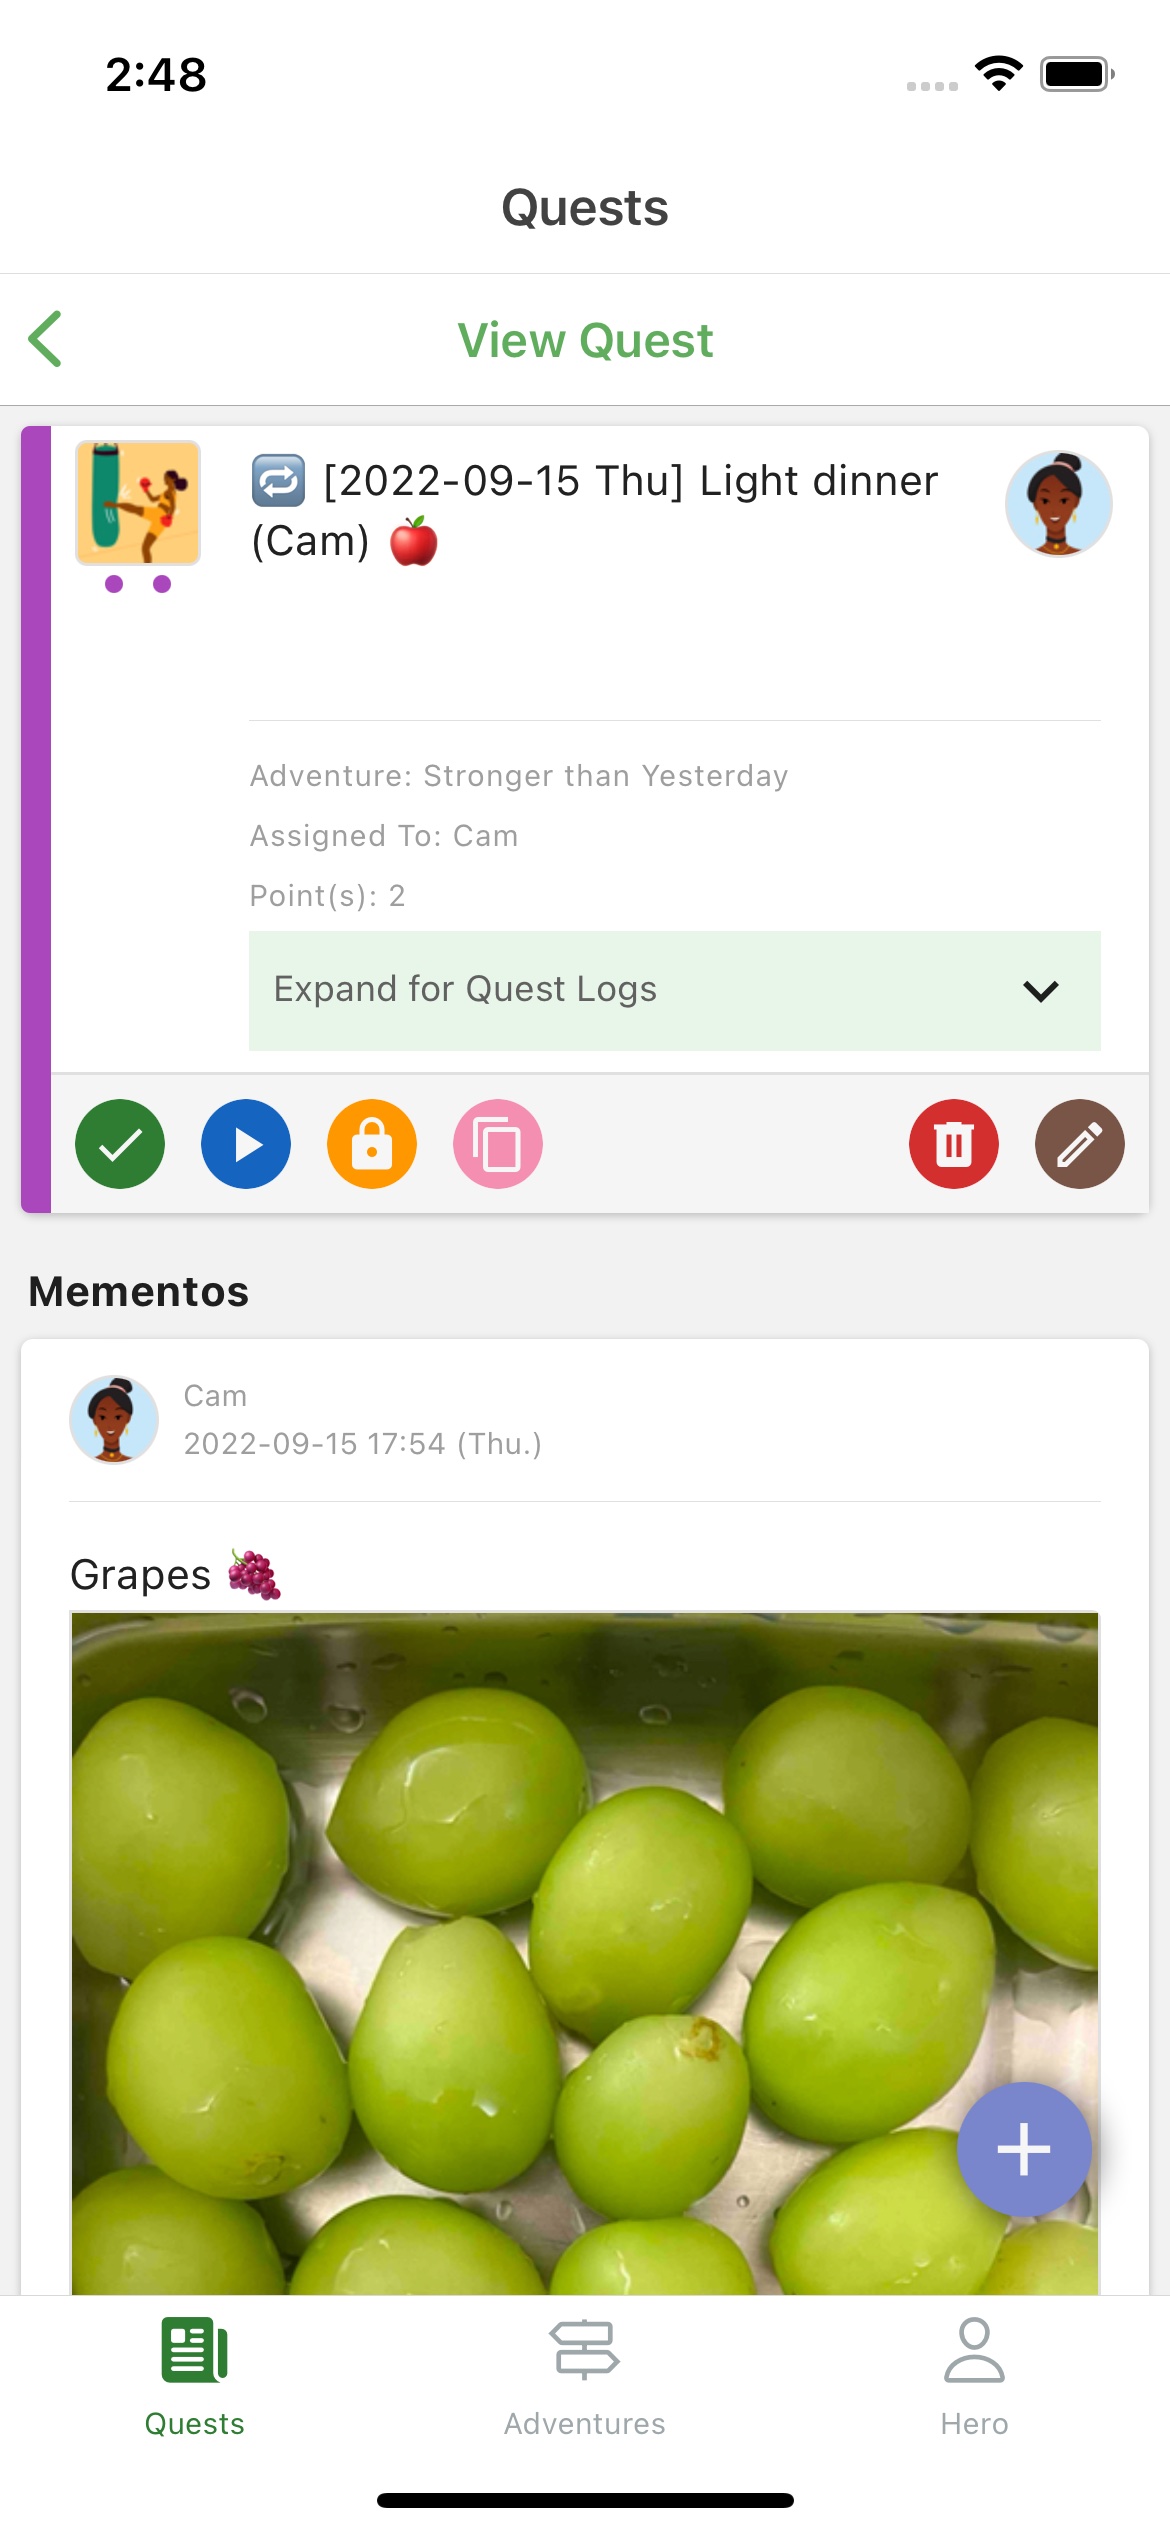 leverage social power by sharing diet photos with buddies in heromode